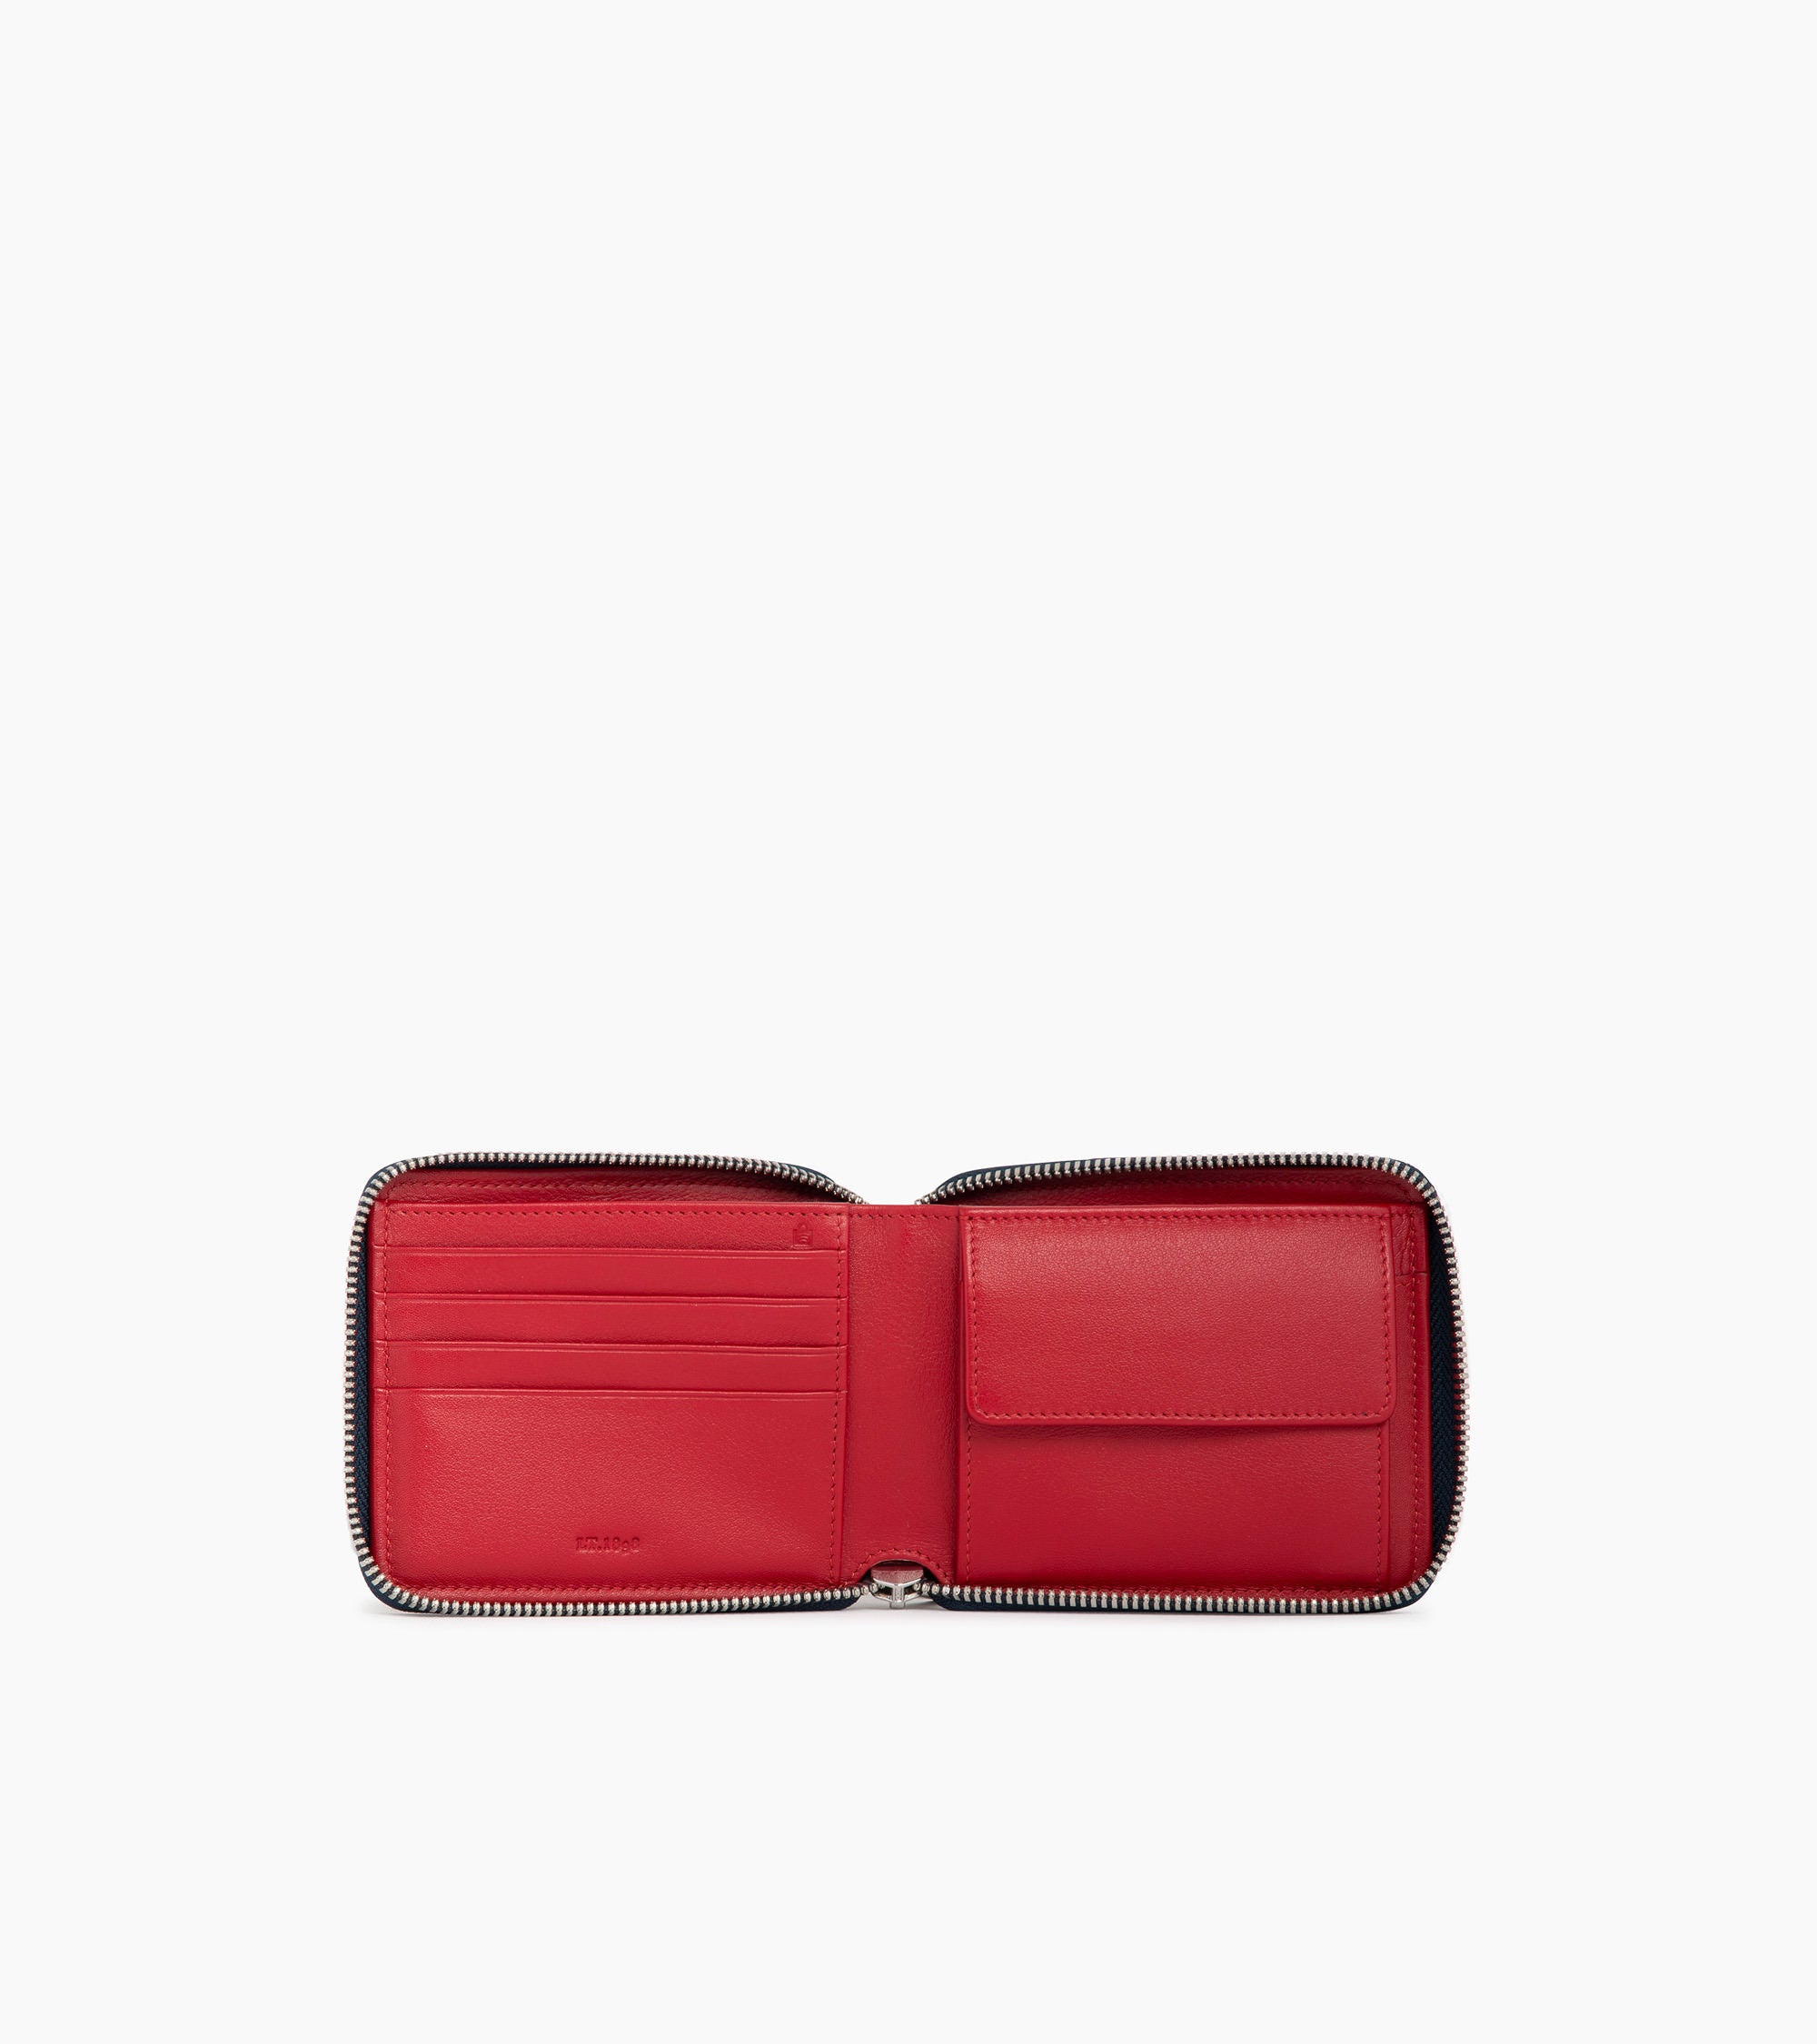 Augustin L-zipped coin case in pebbled leather